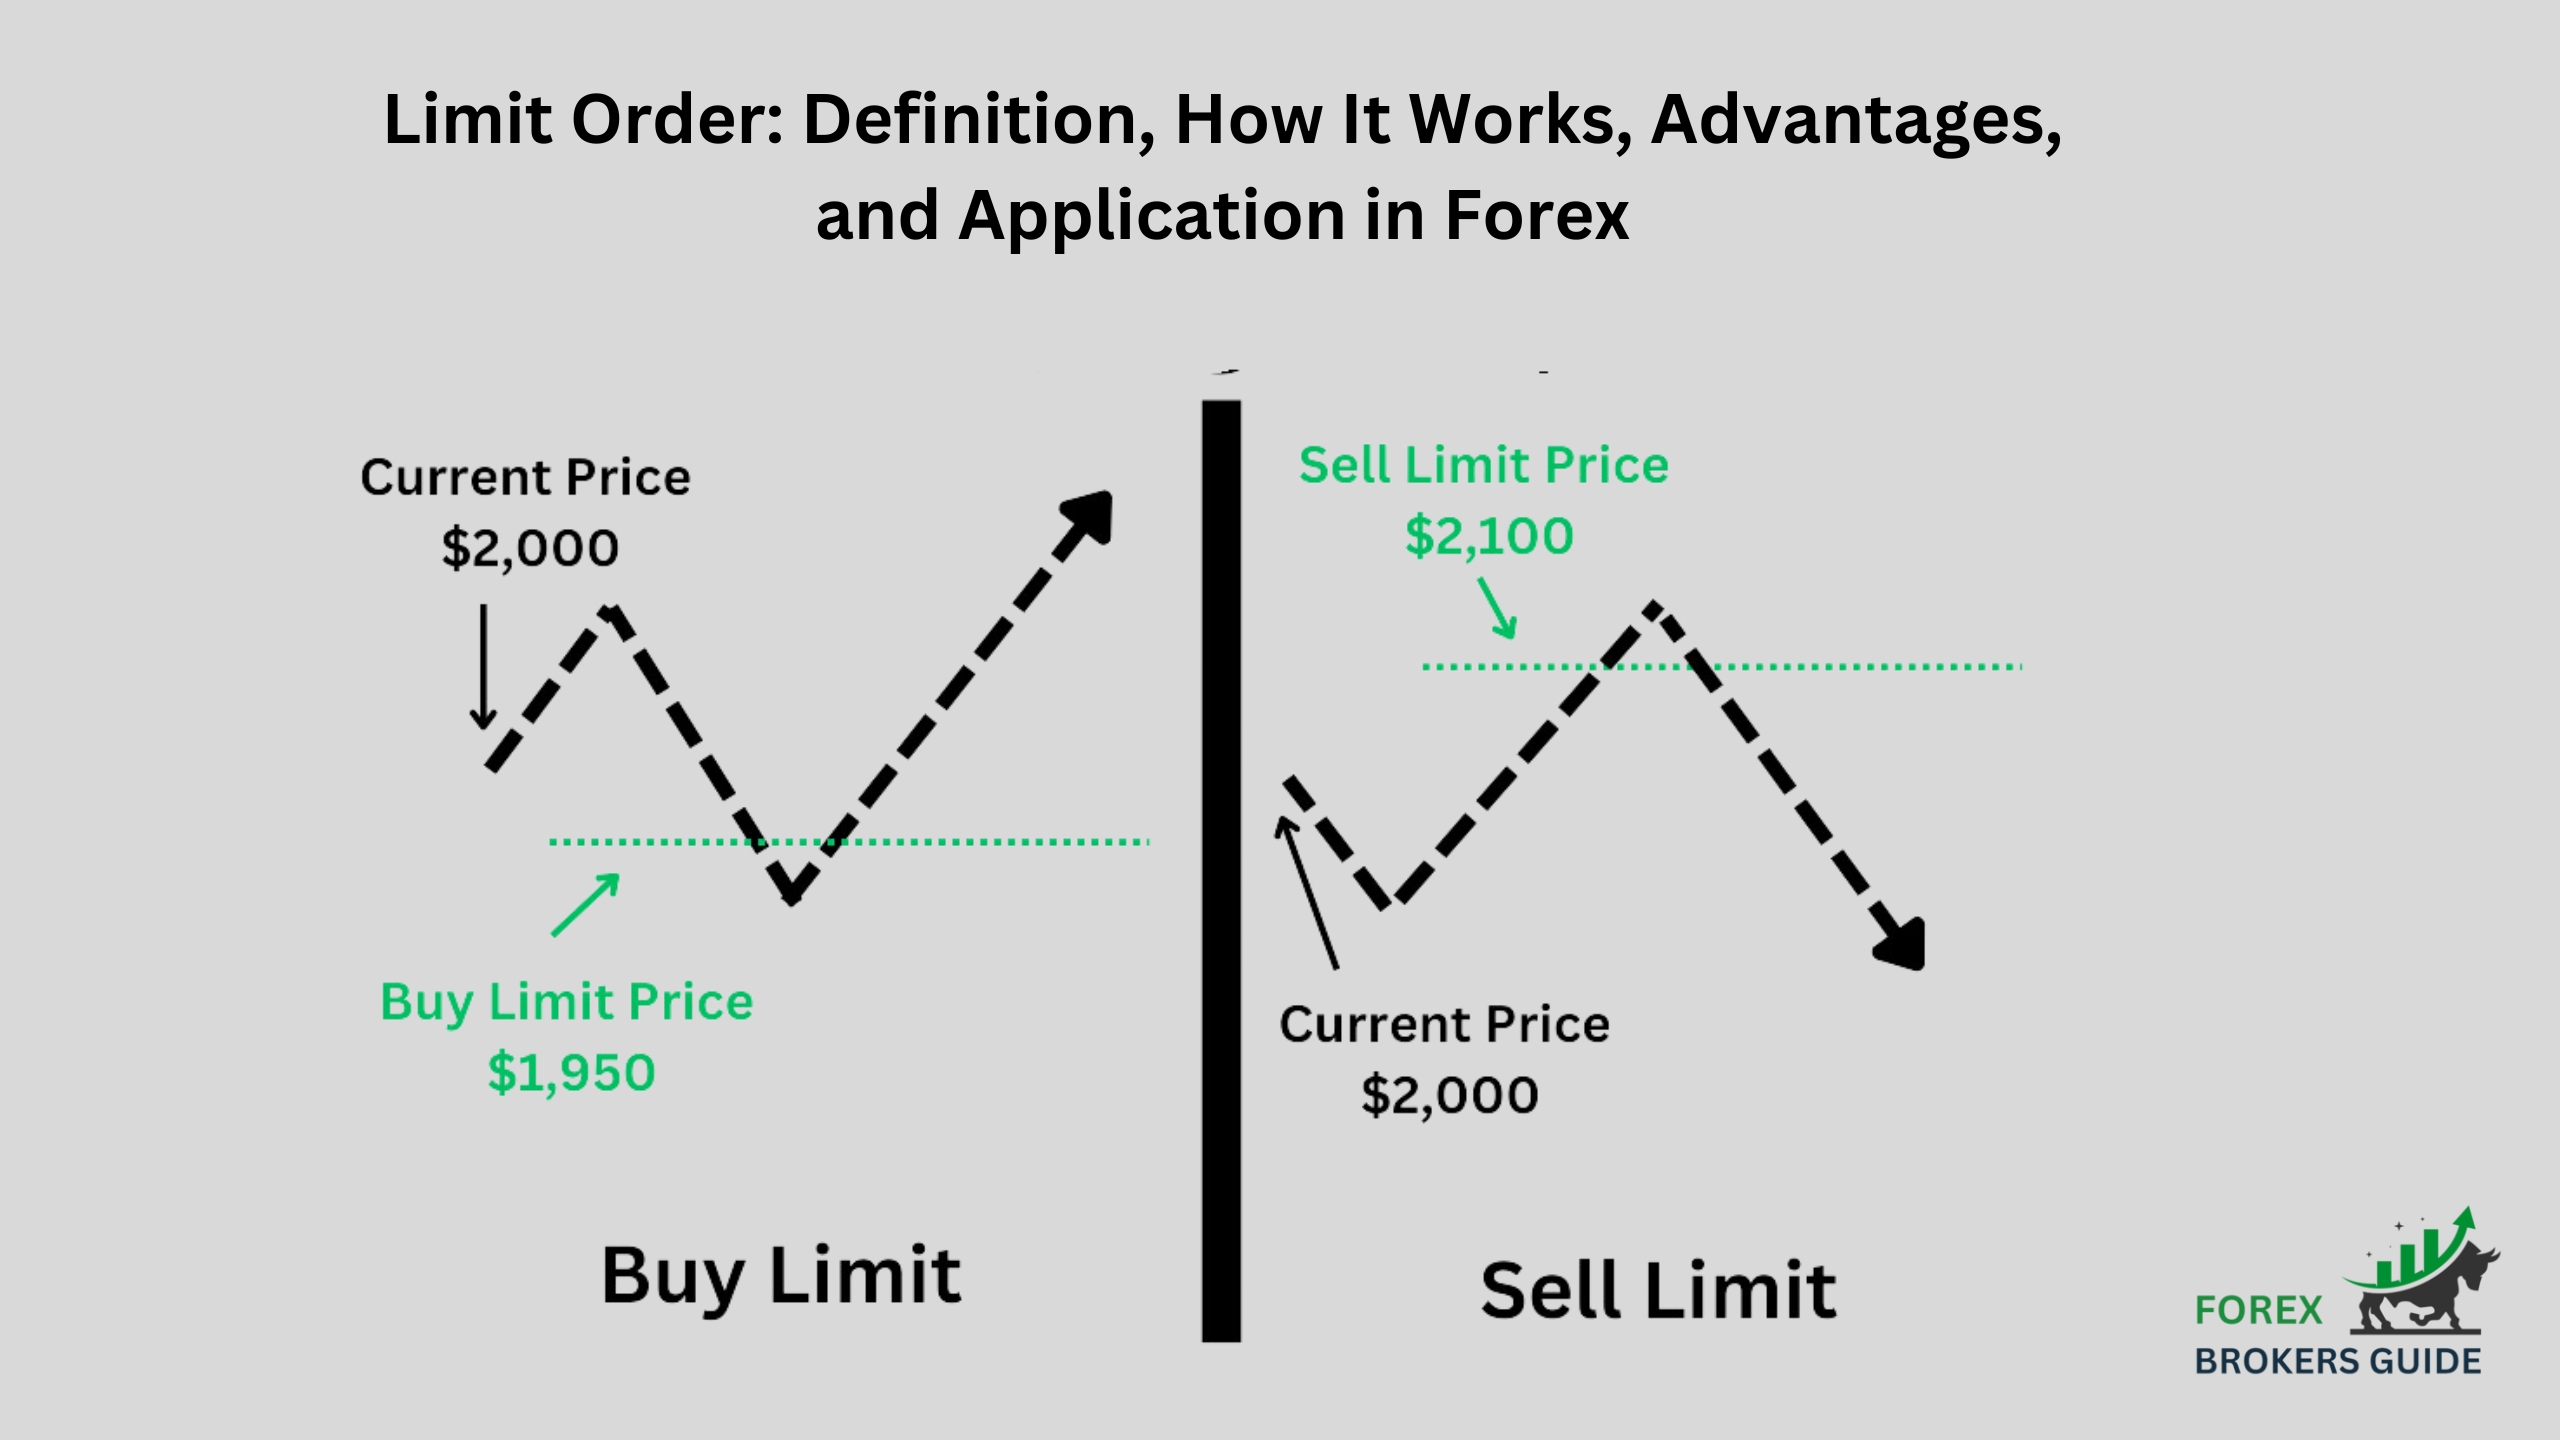 Limit Order Definition, How It Works, Advantages, and Application in Forex